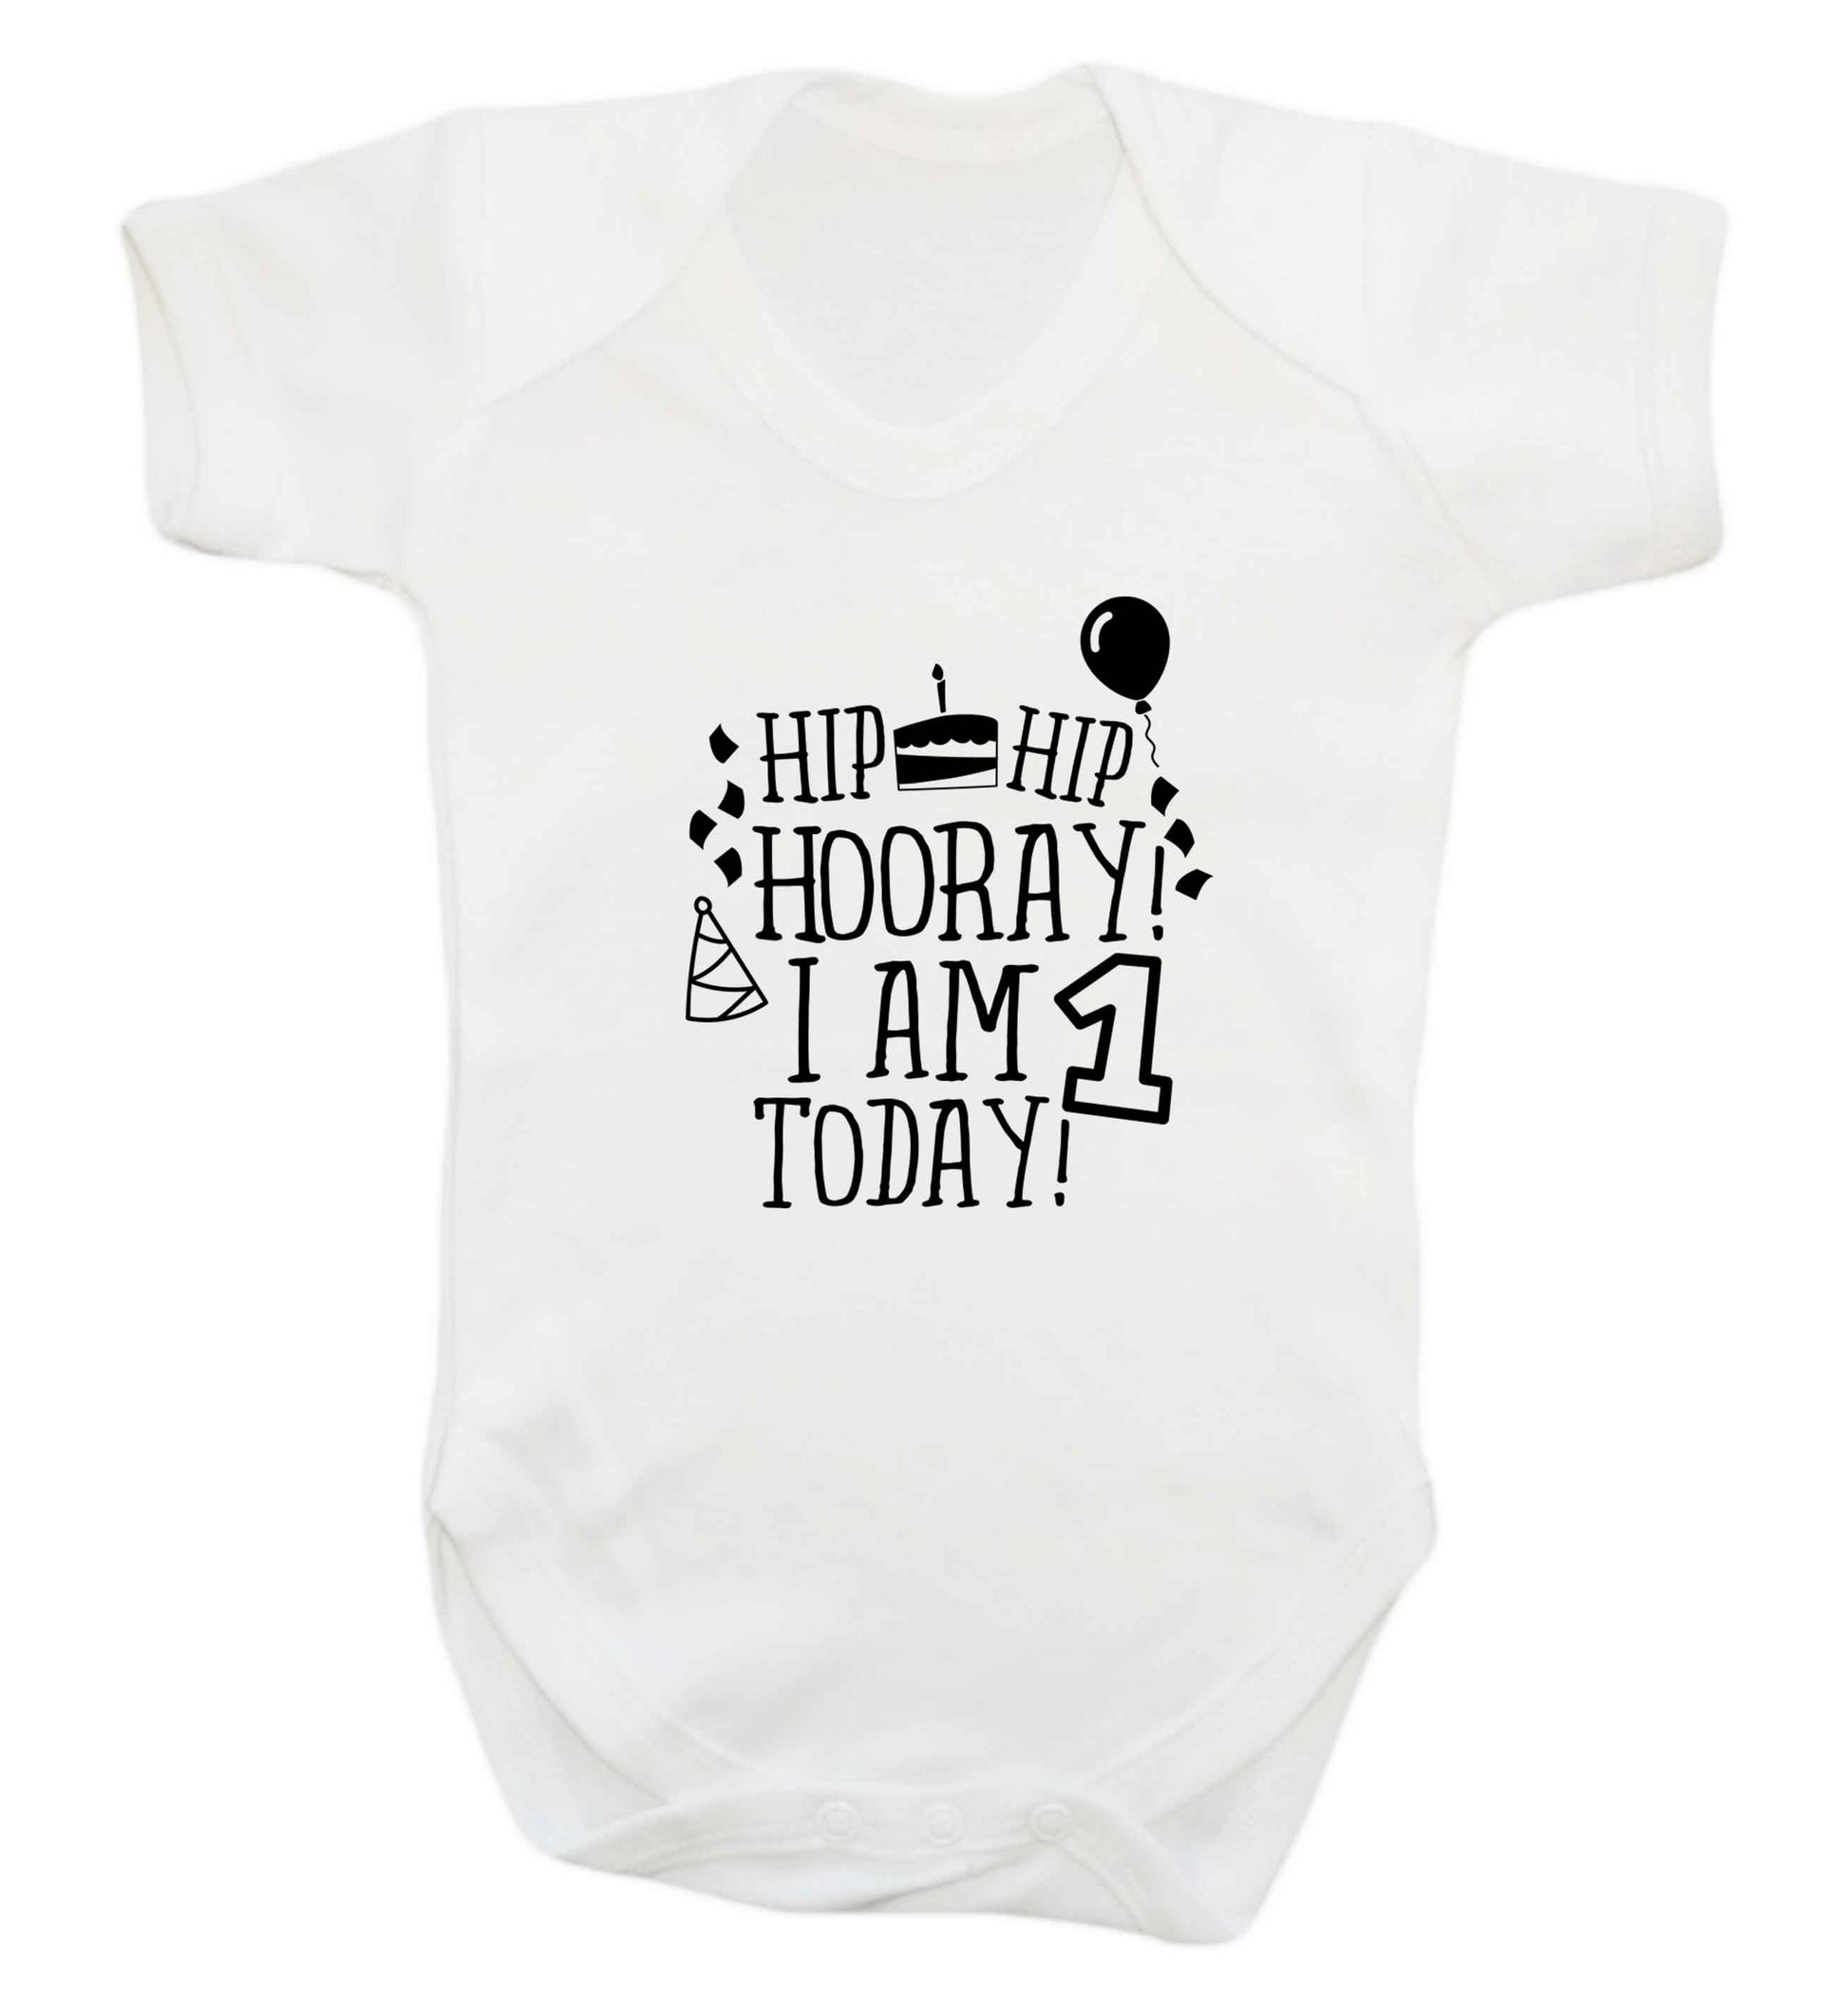 I am One Today baby vest white 18-24 months